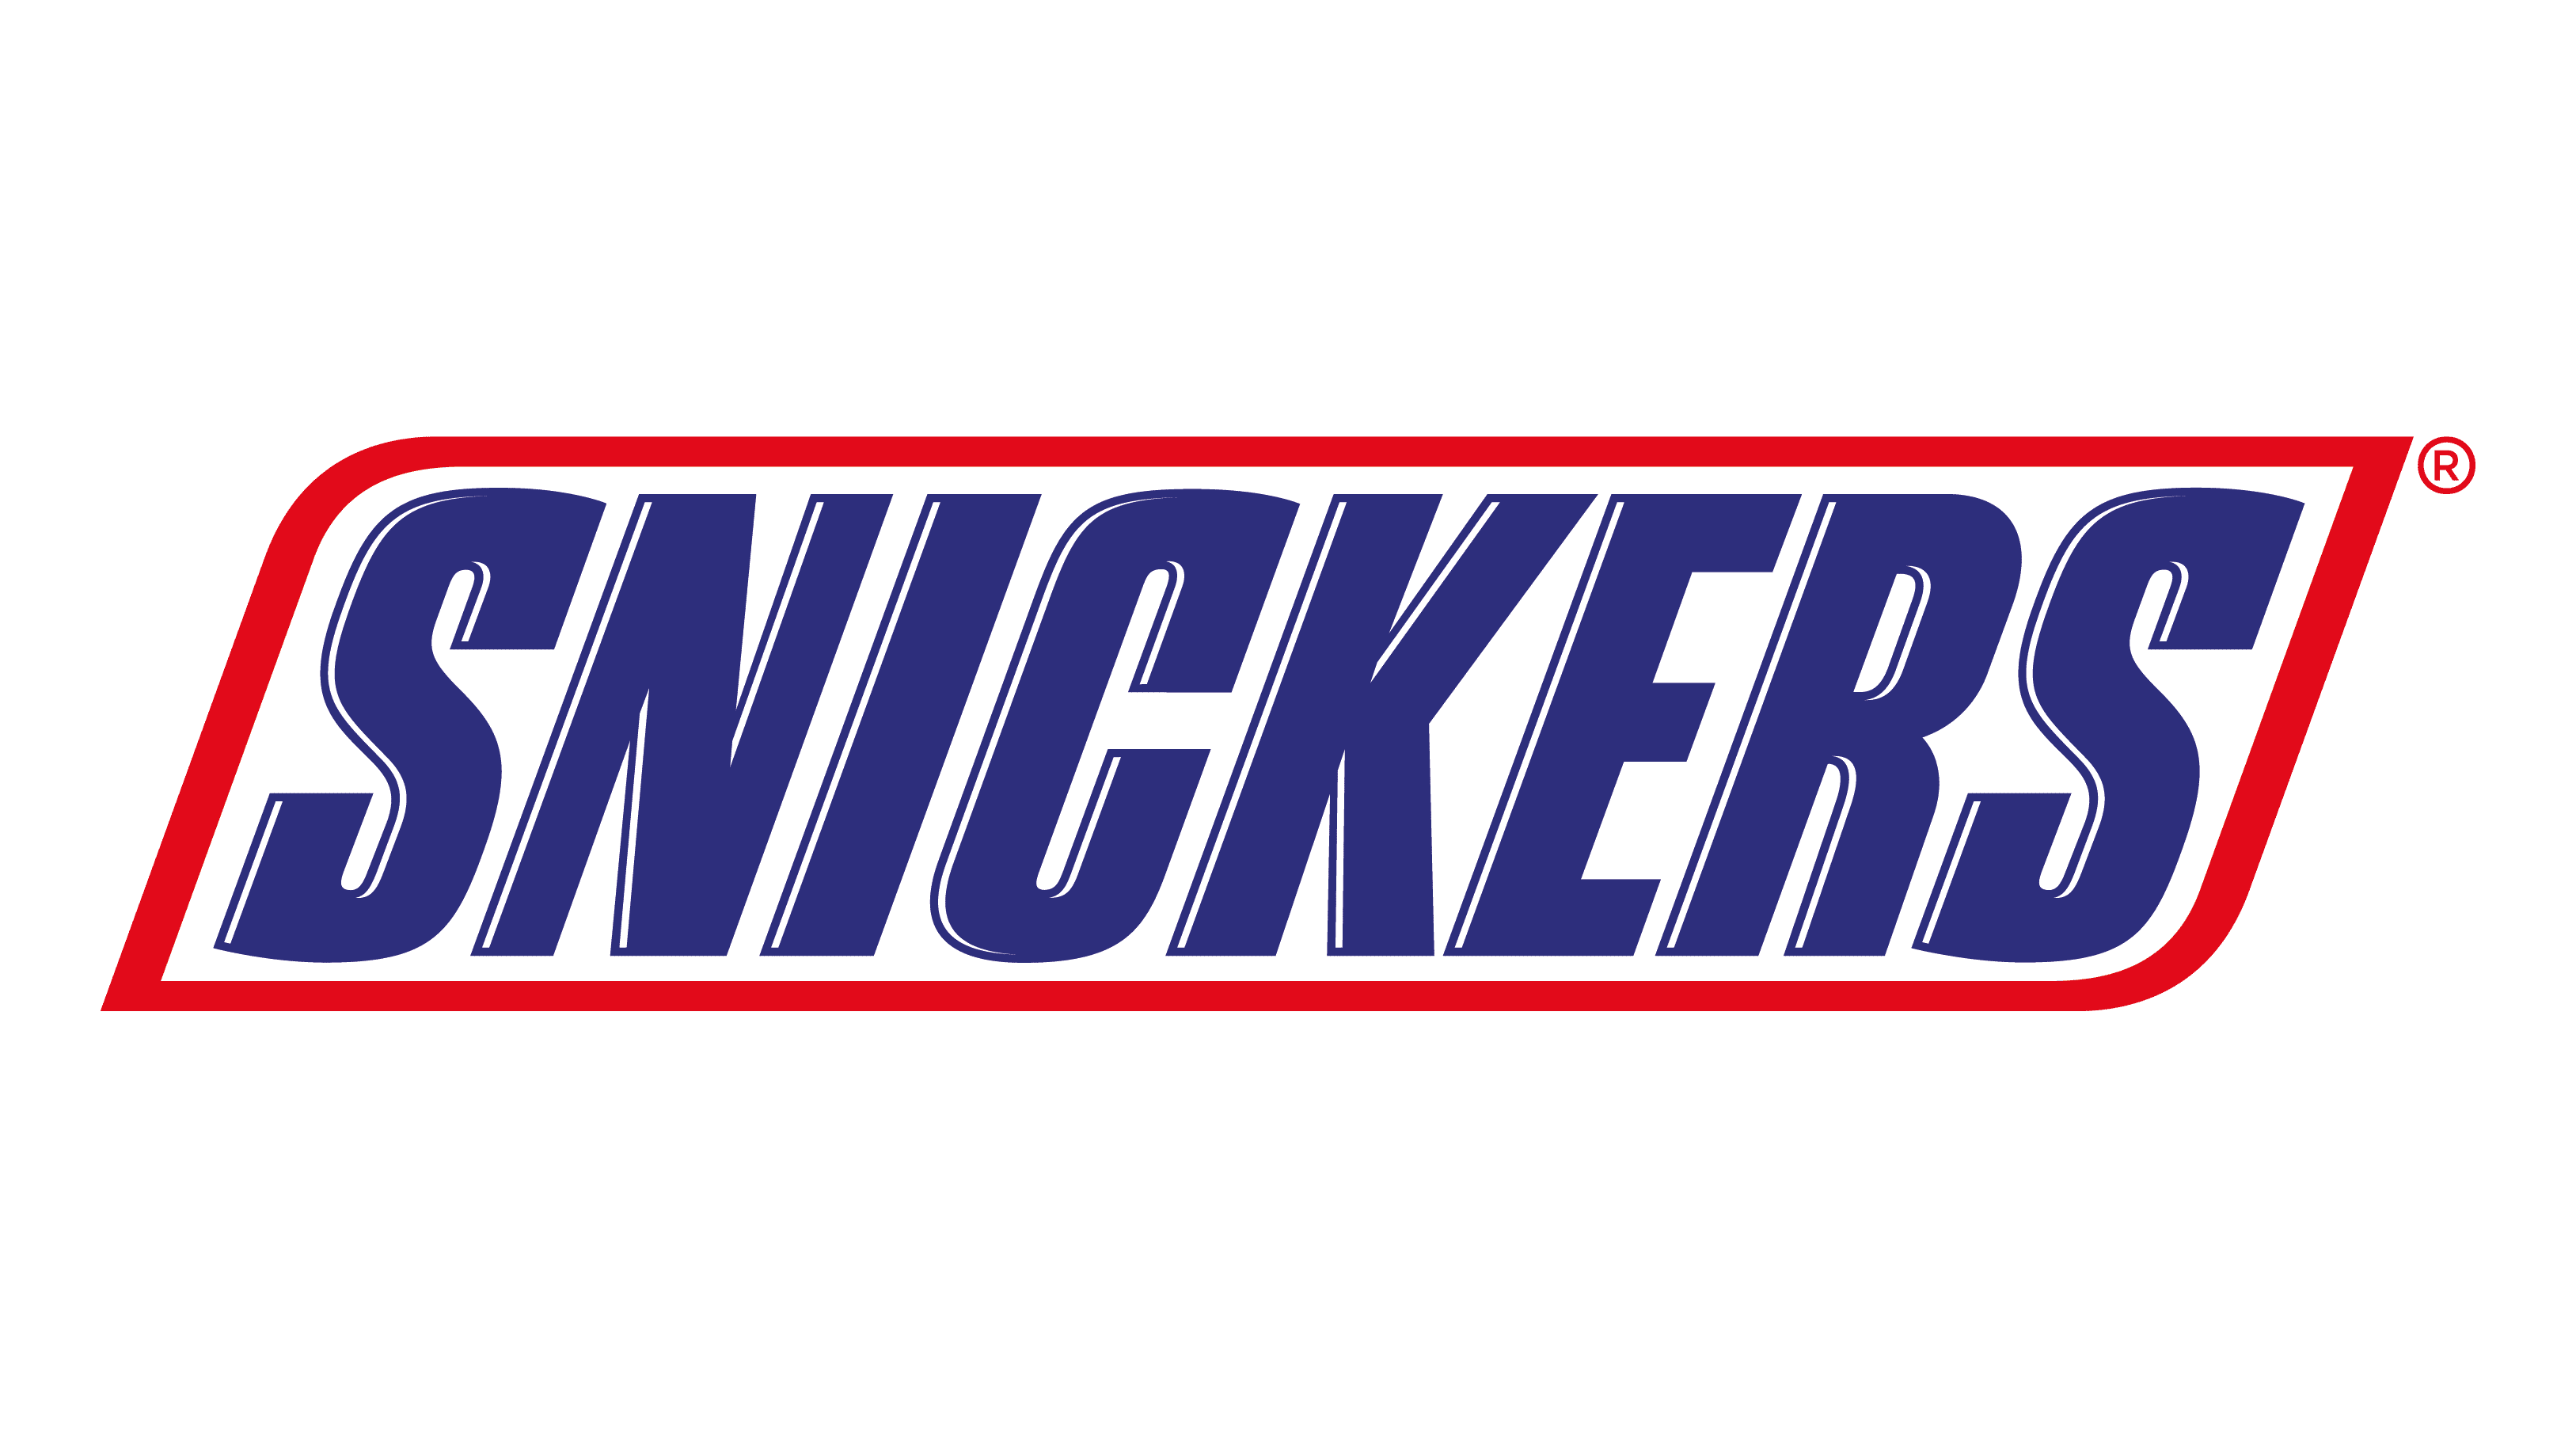 How Snickers Became America's #1 Favorite Candy Bar